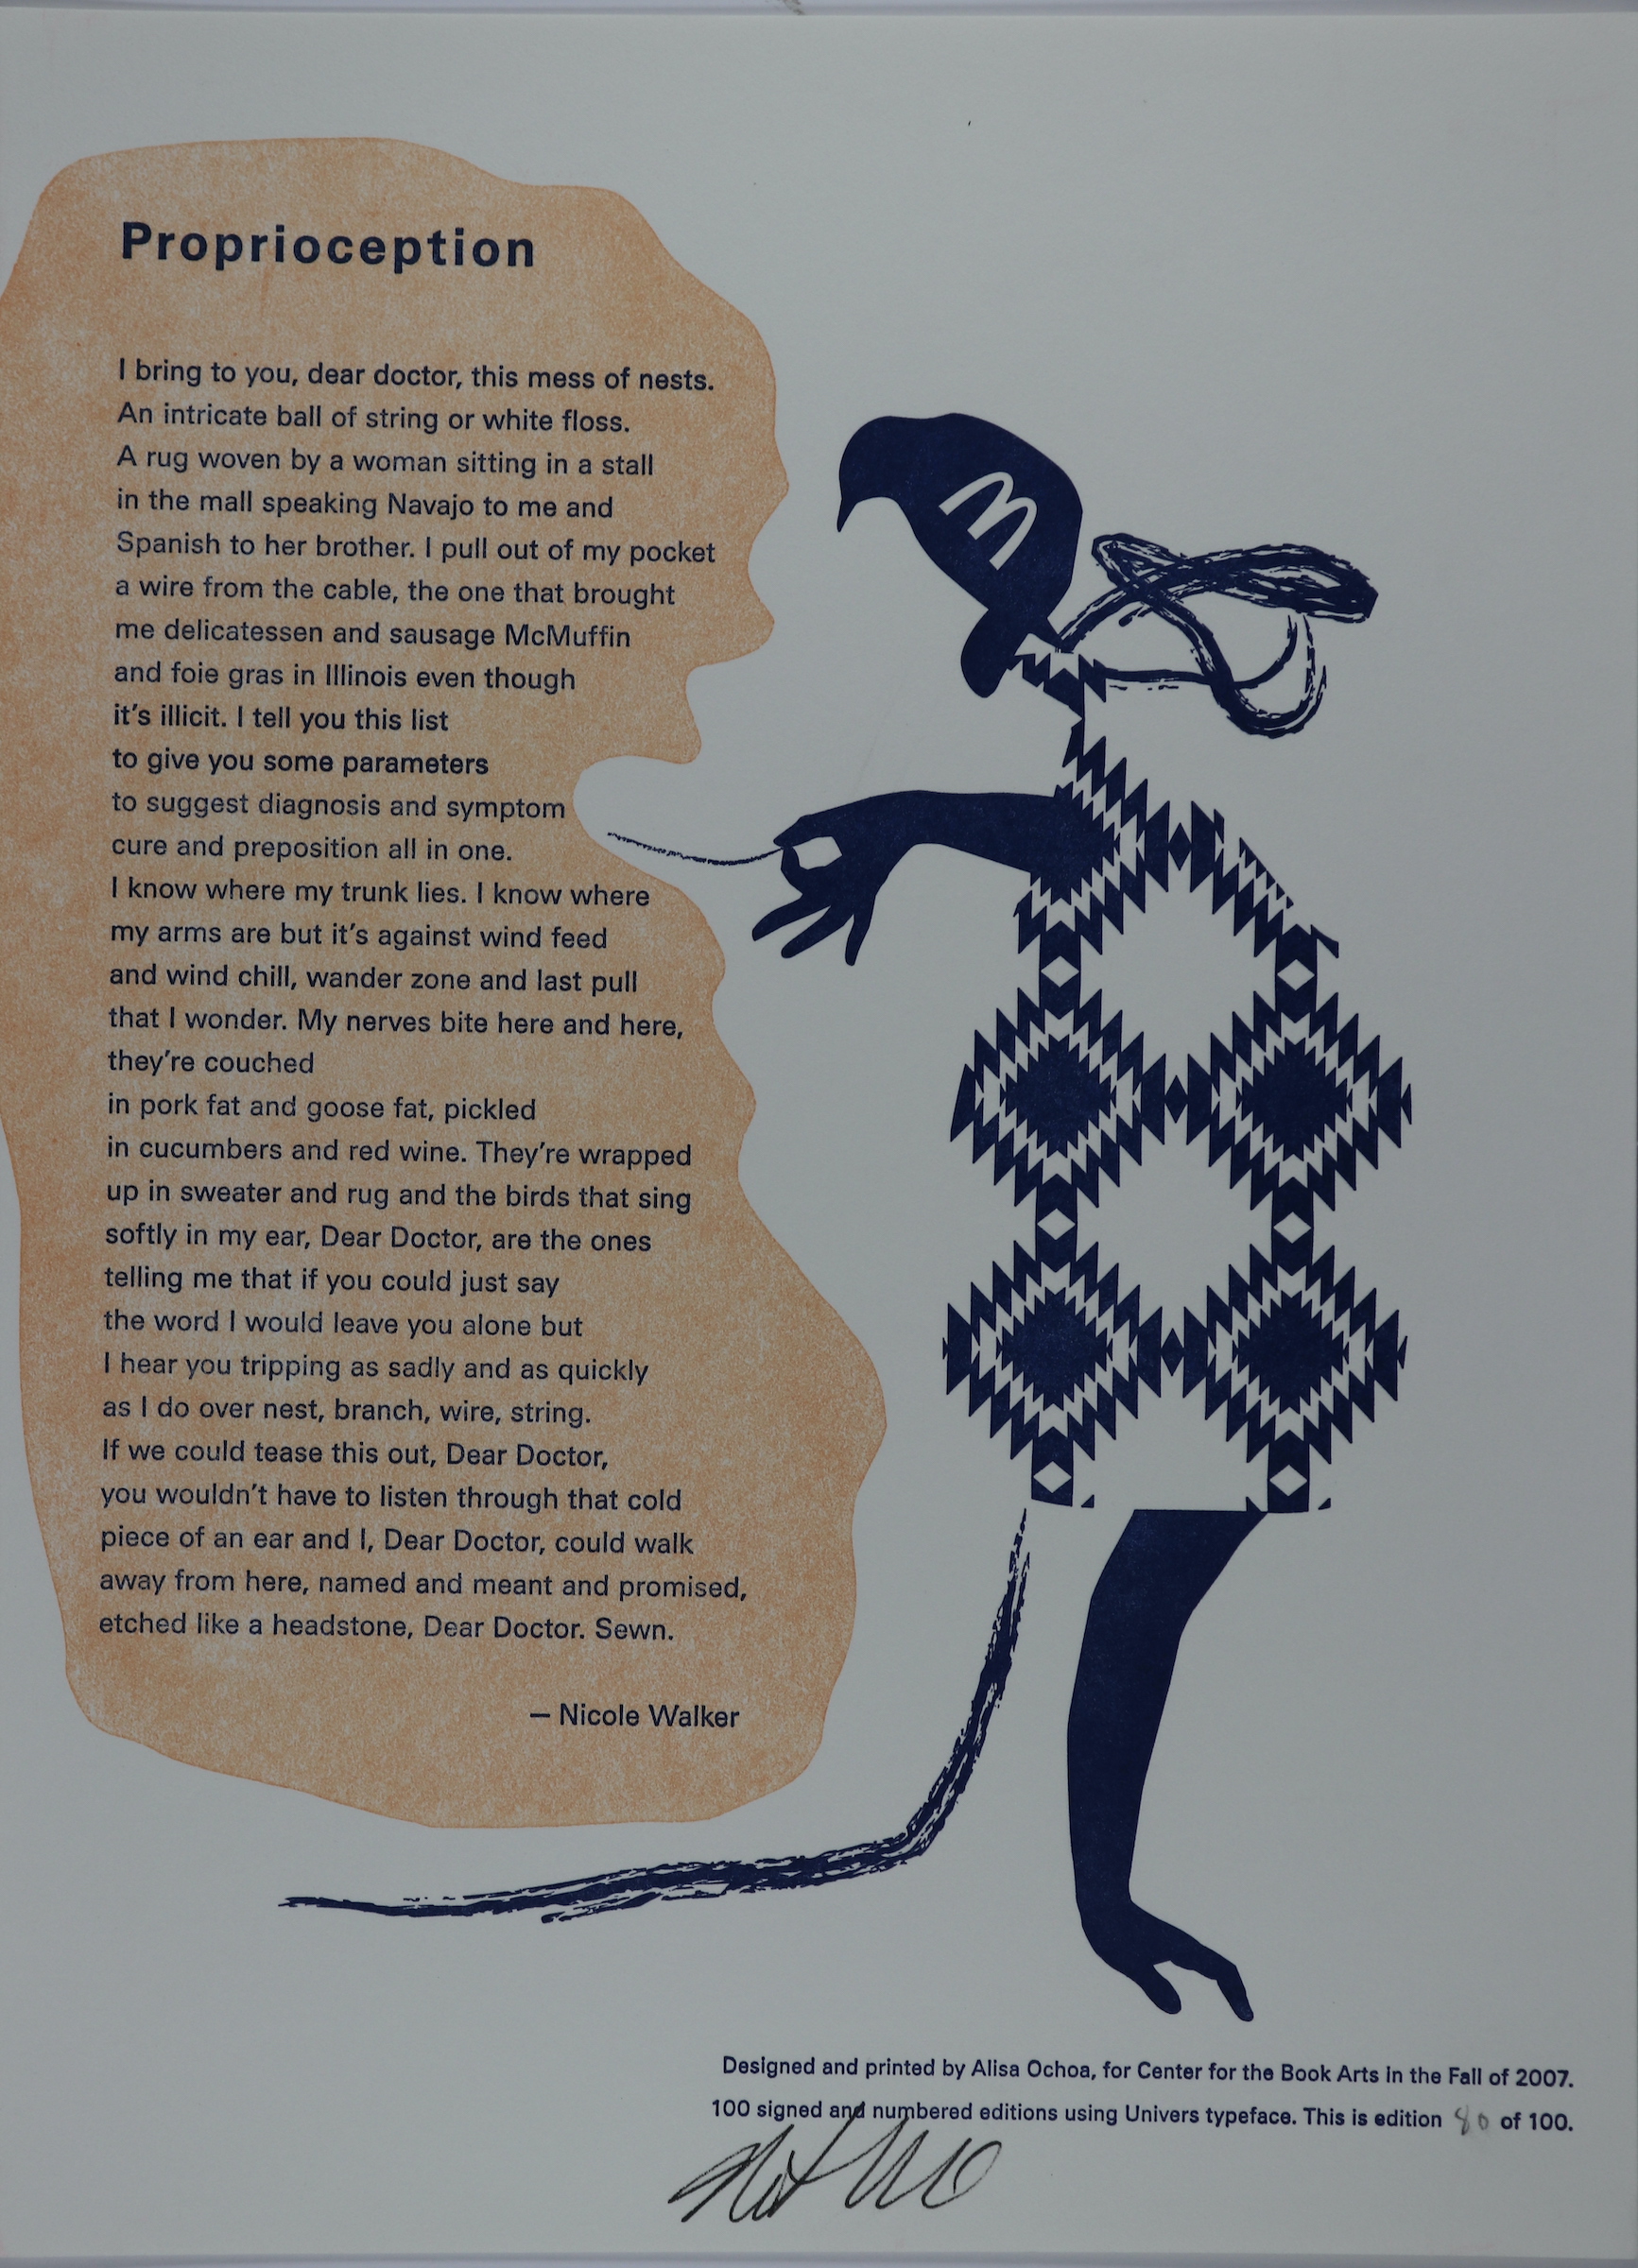 White background with an orange colored print to the left that has the title and body of the text in dark blue. To the right there is a drawn out figure of a woman in the same dark blue with what seems to be a white dress with dark blue patters, a blue hat with an "M" on it and an arm stretched out, pulling at a string from the orange text box. Her leg is replaced with an arm and hand and her other leg is instead strings.